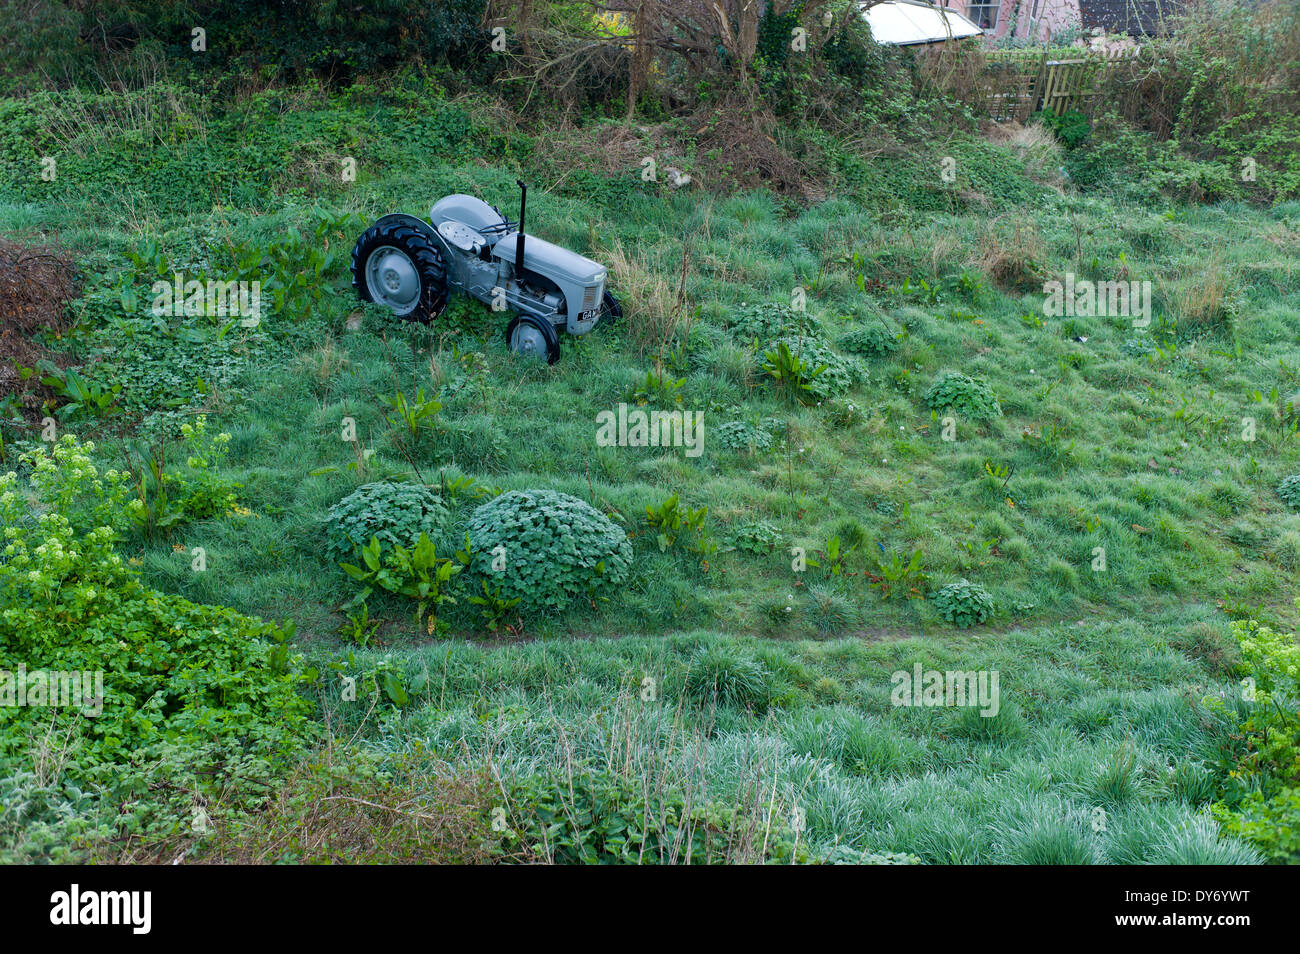 Old tractor in rough field, Hastings, UK Stock Photo